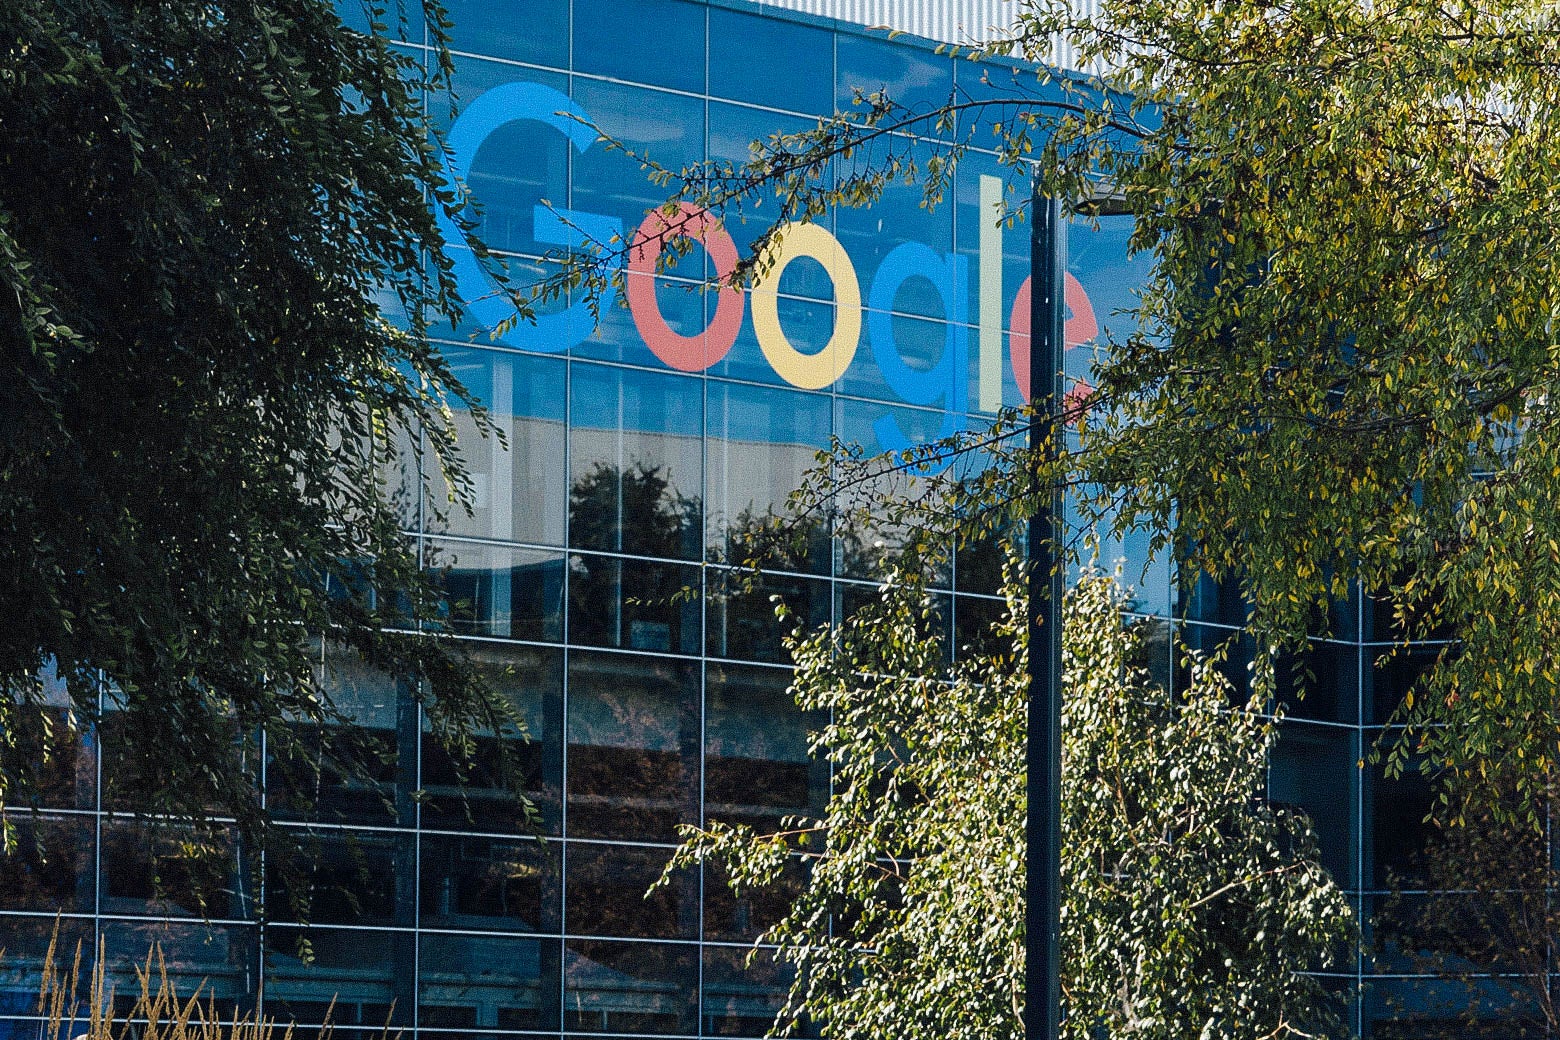 The Google campus in Mountain View, California, was one of the sites of employee protests on May 1, 2019.